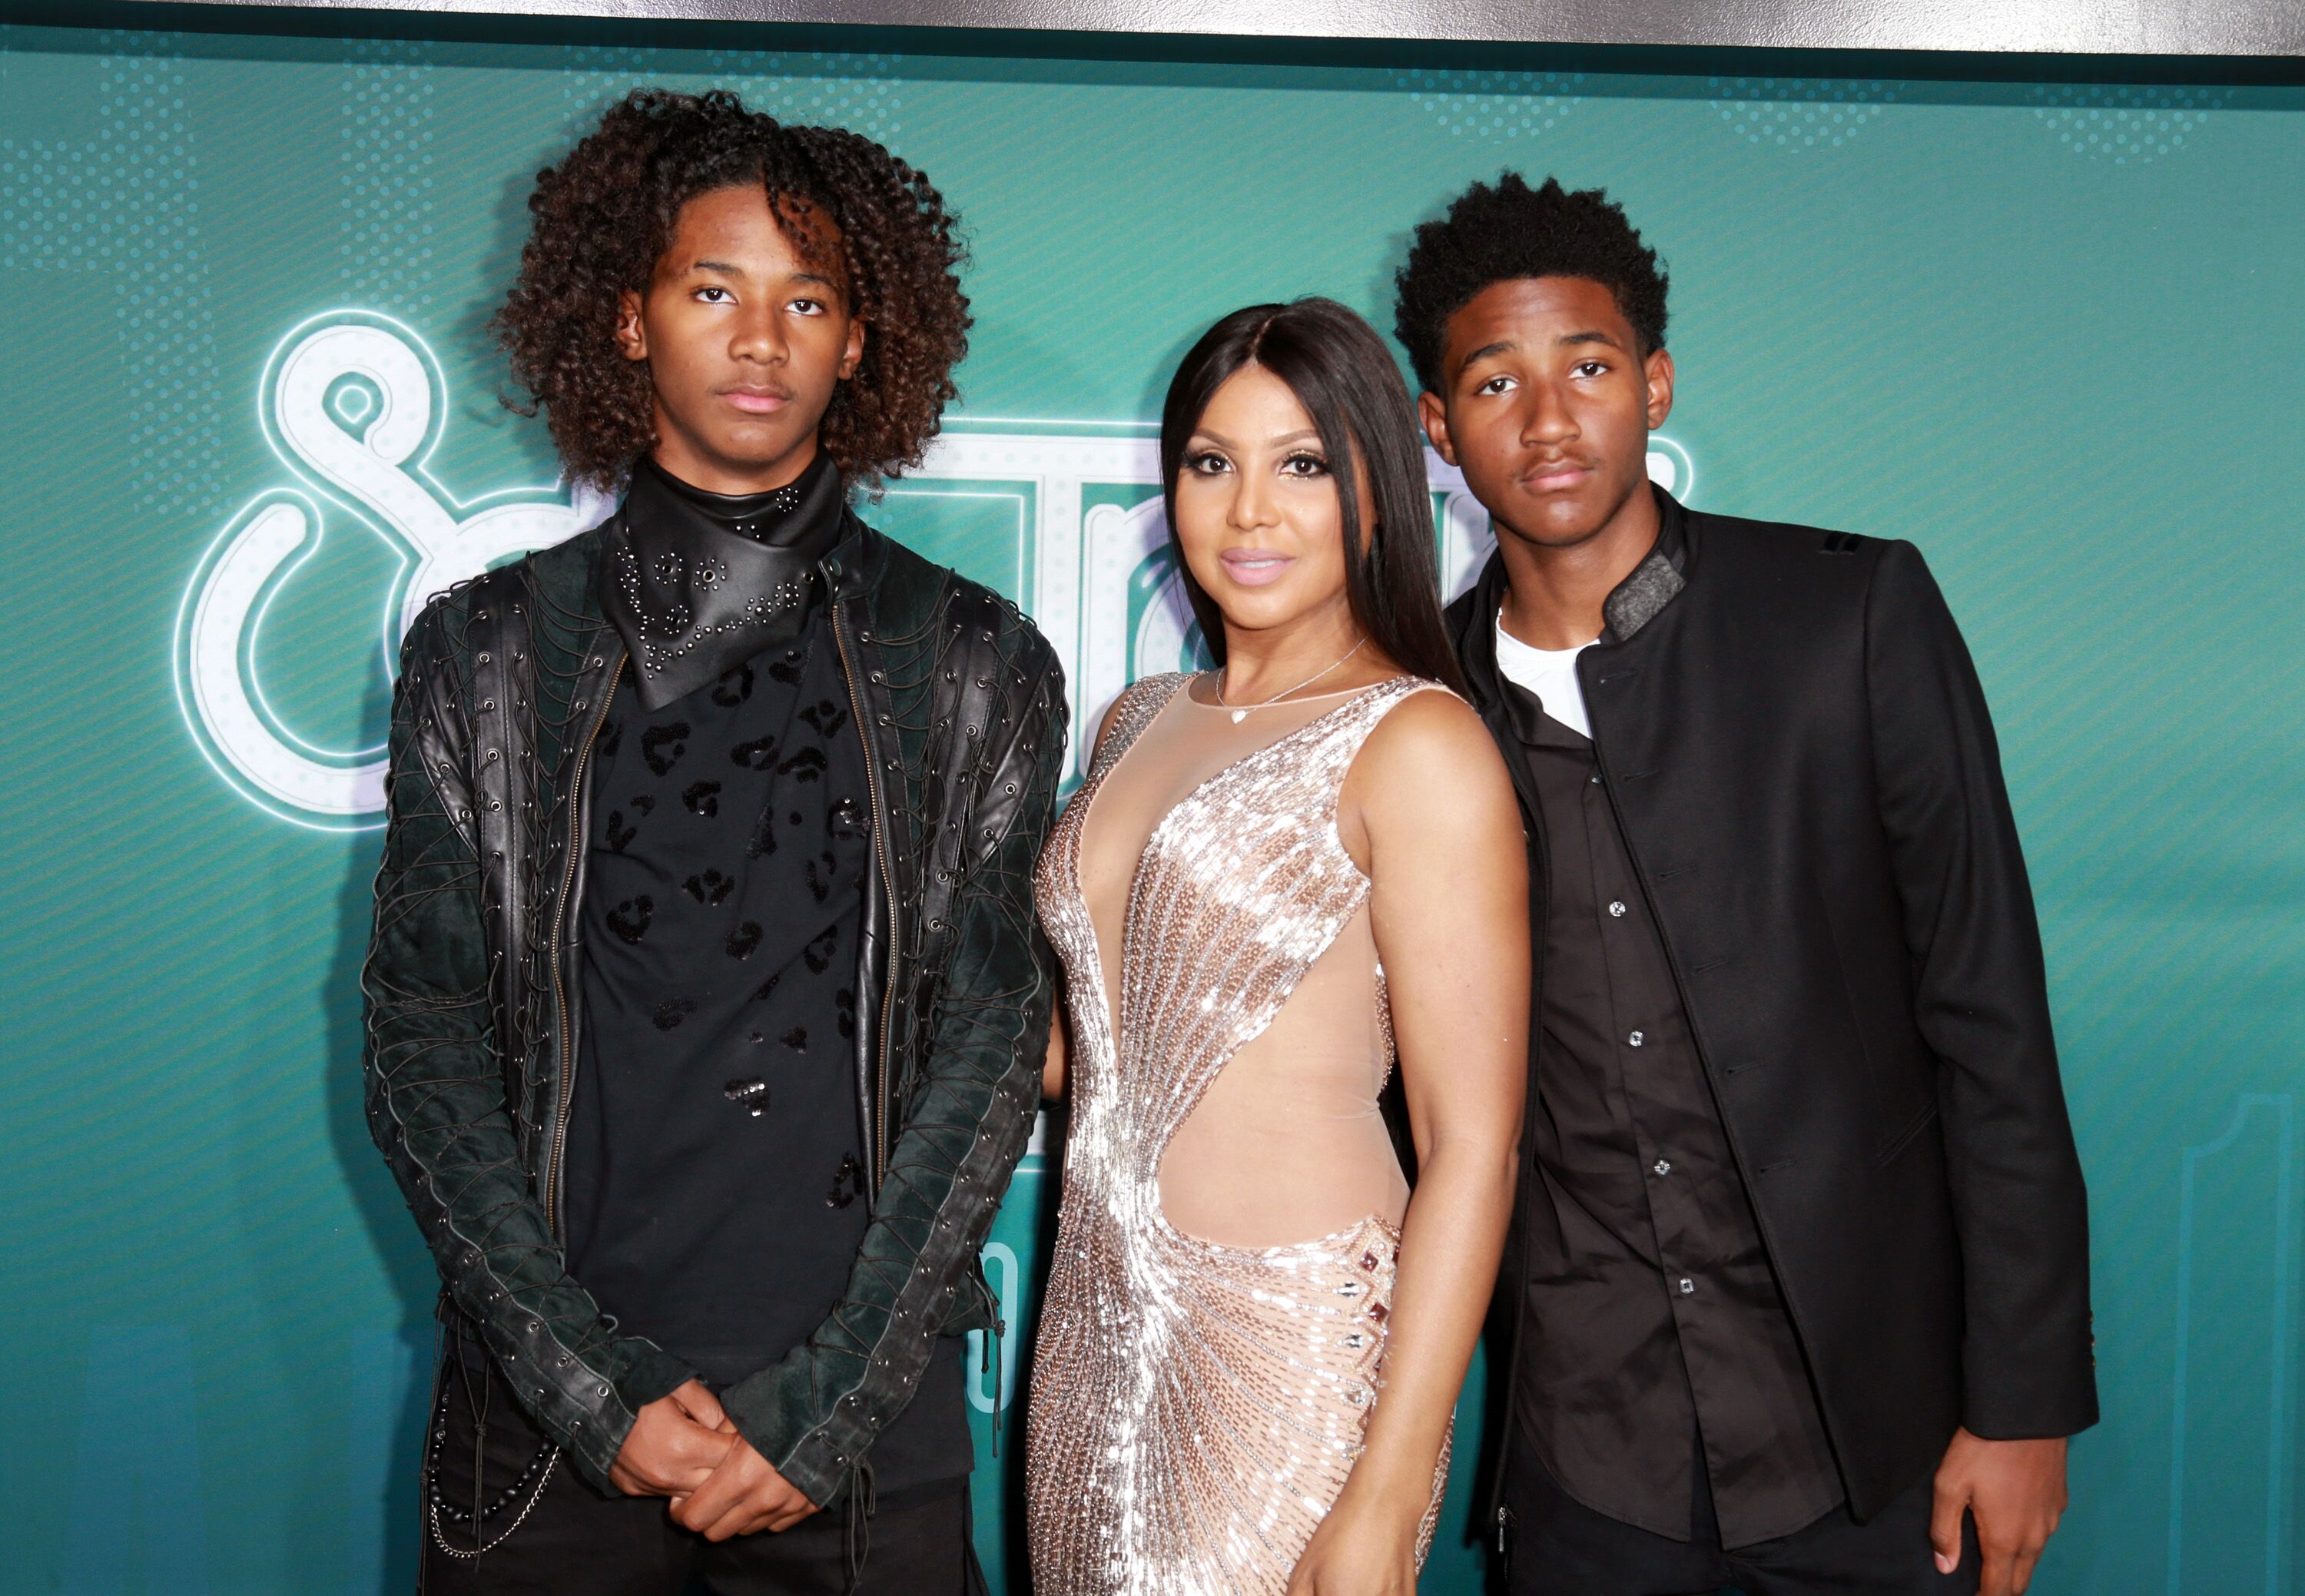 Toni Braxton and her sons Diezel and Denim attend the 2017 Soul Train Awards. | Photo: Getty Images